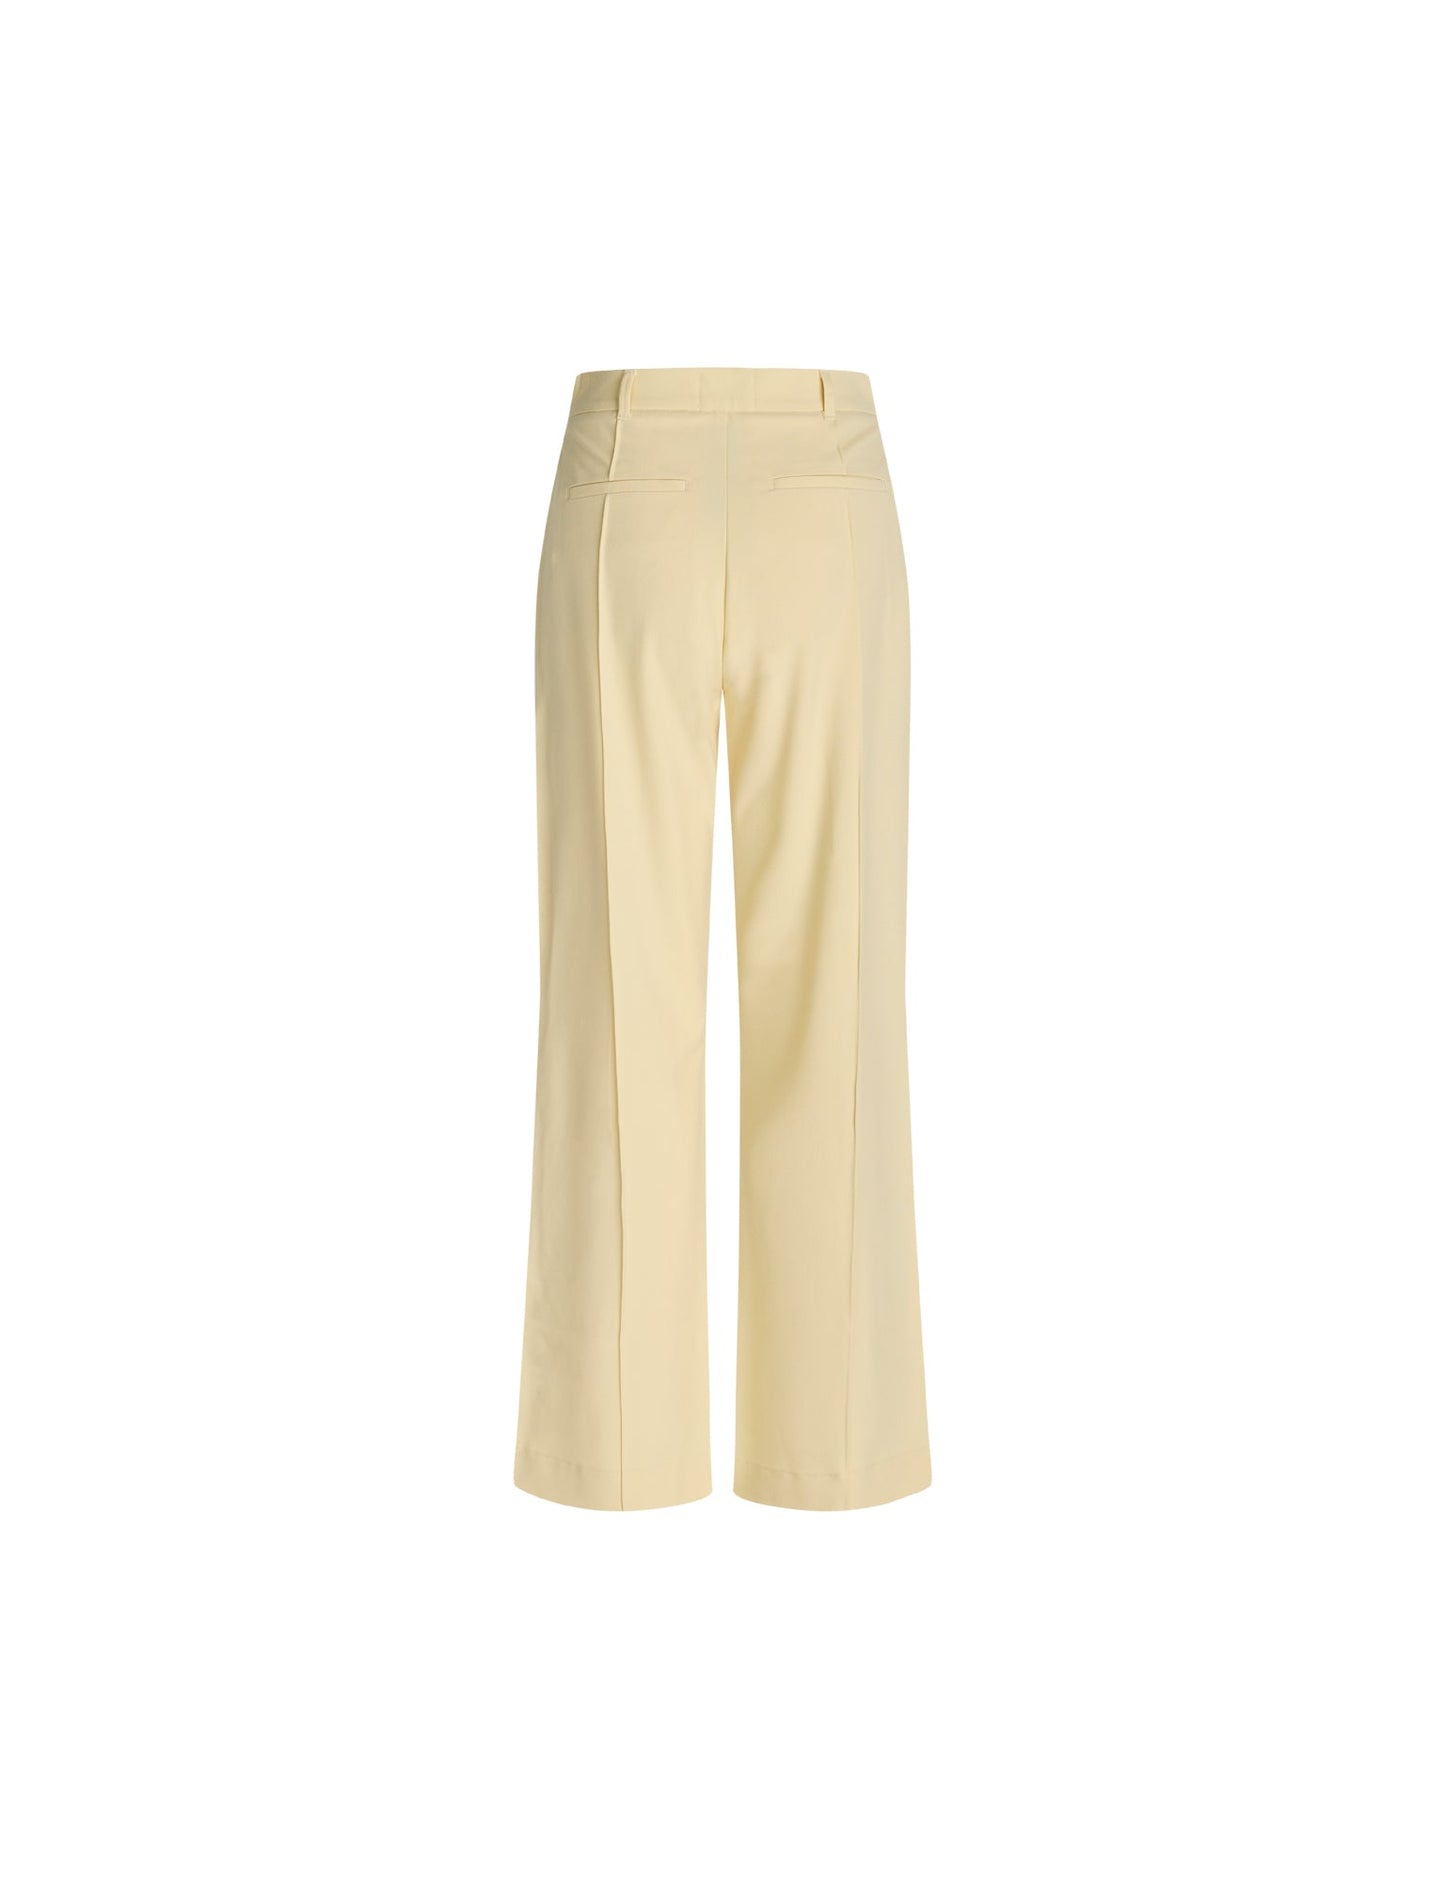 Recycled Sportina Perry Pants,  Double Cream